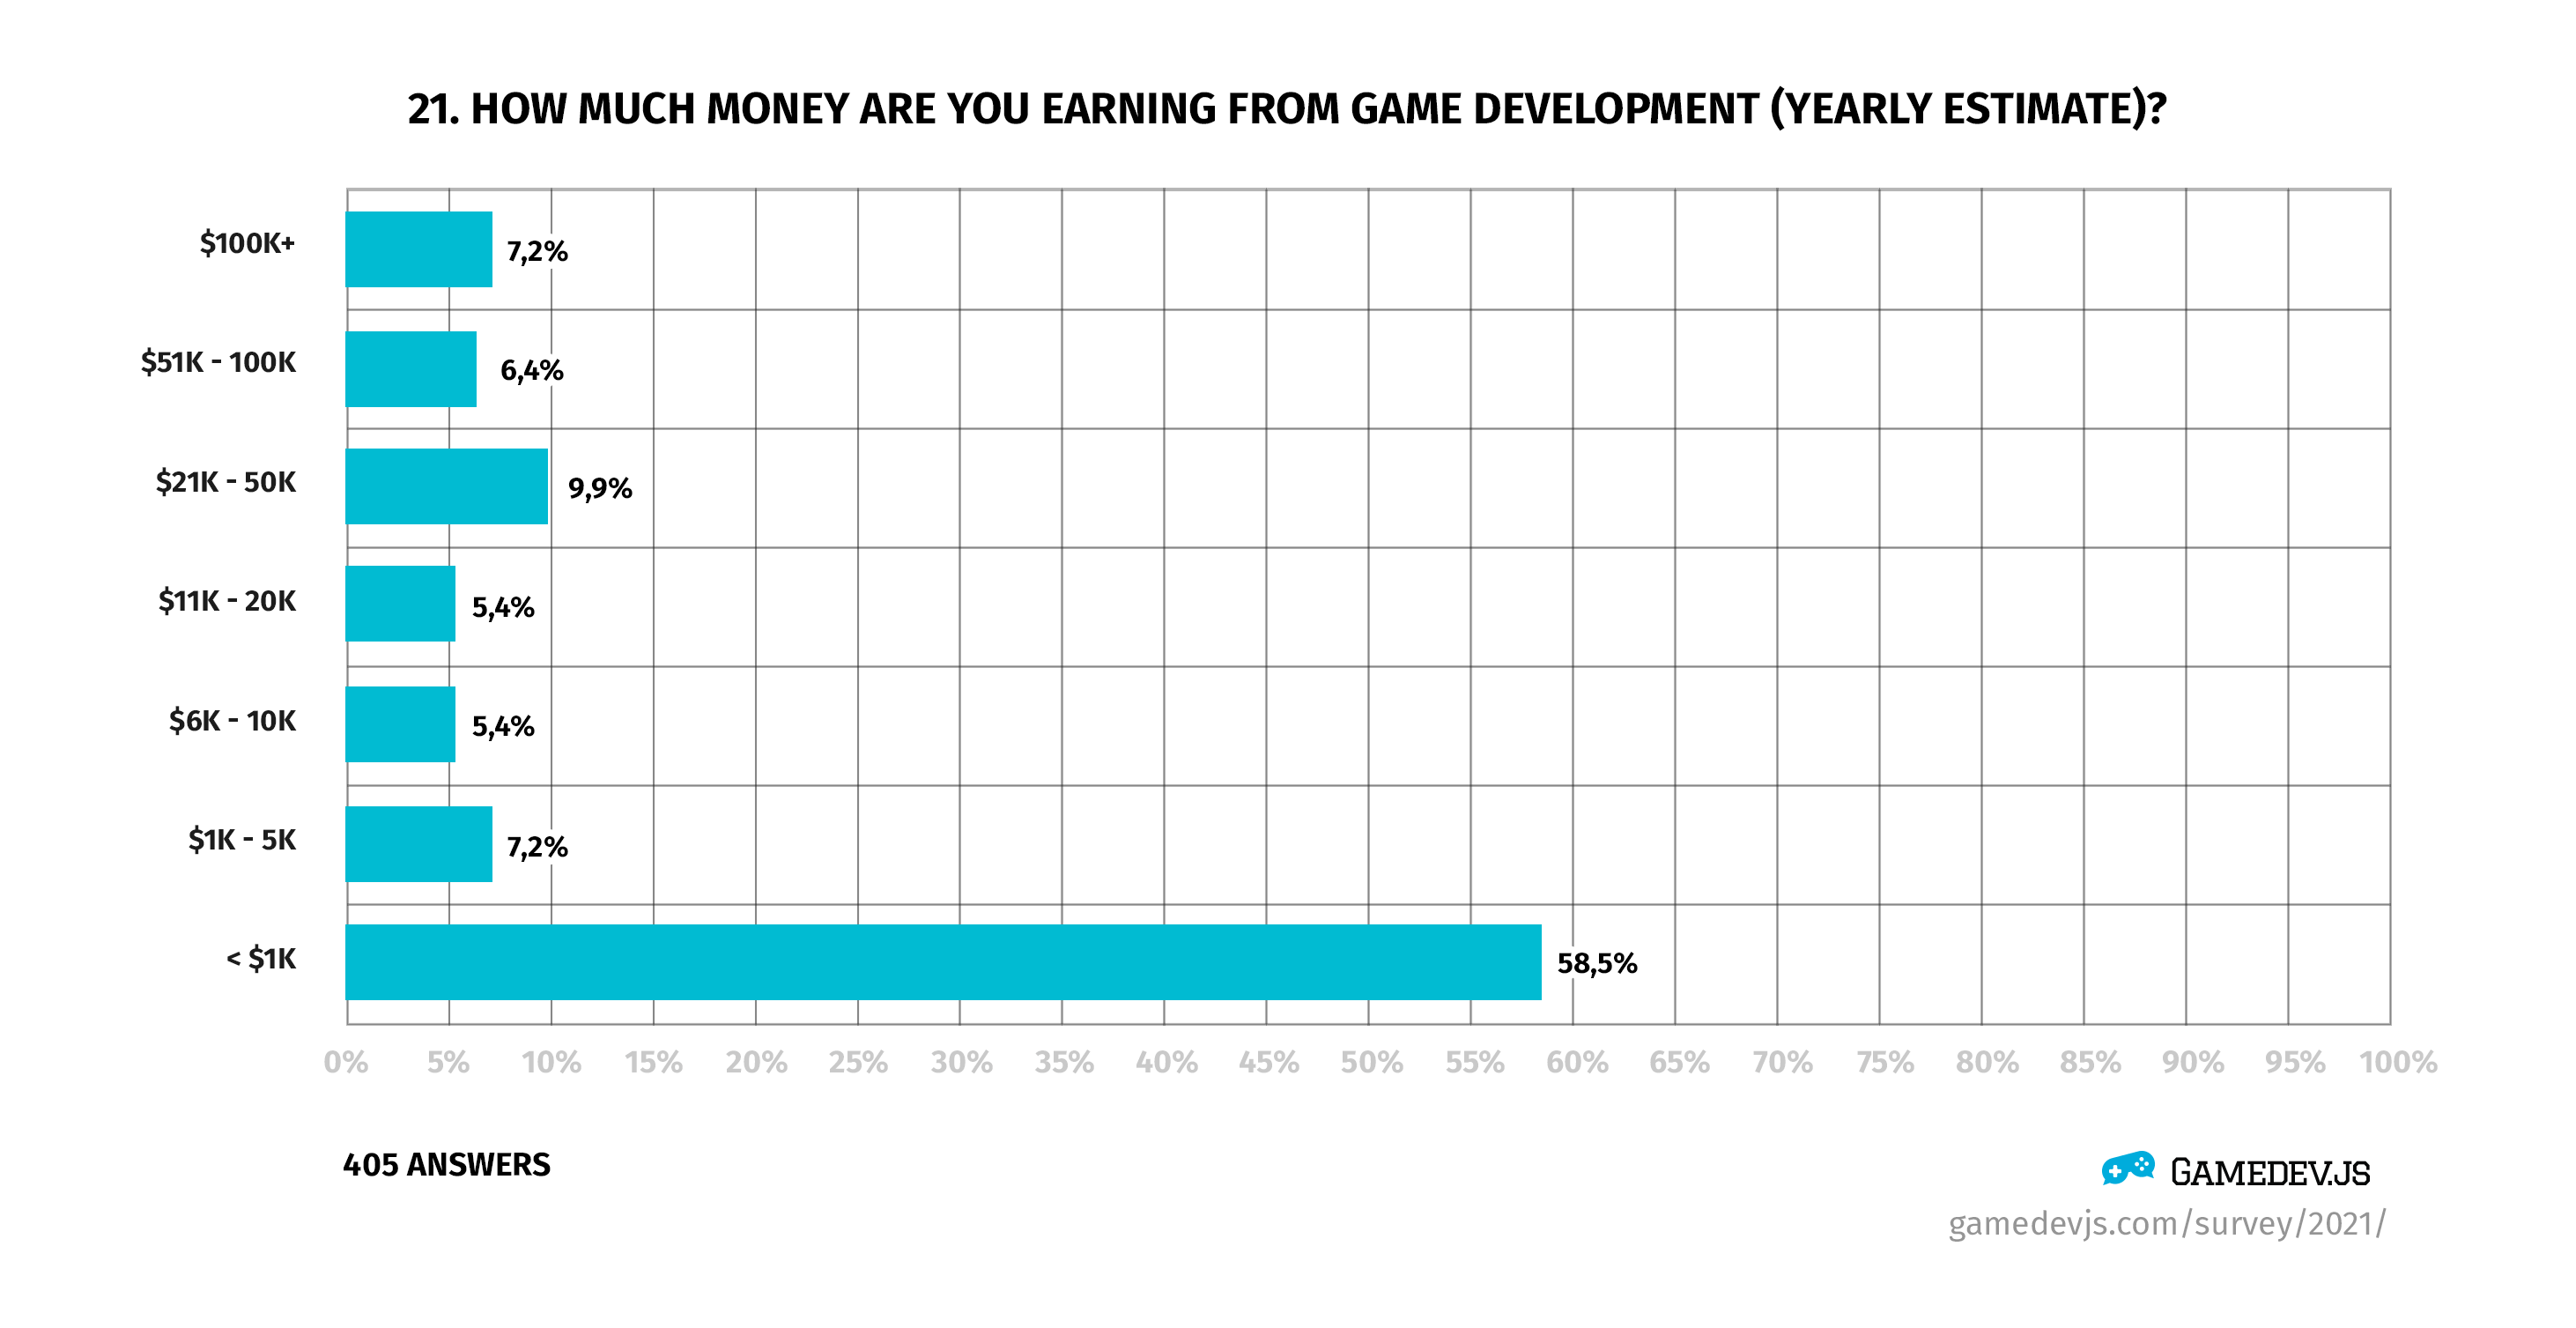 Gamedev.js Survey 2021 - Question #21: How much money are you earning from game development (yearly estimate)?